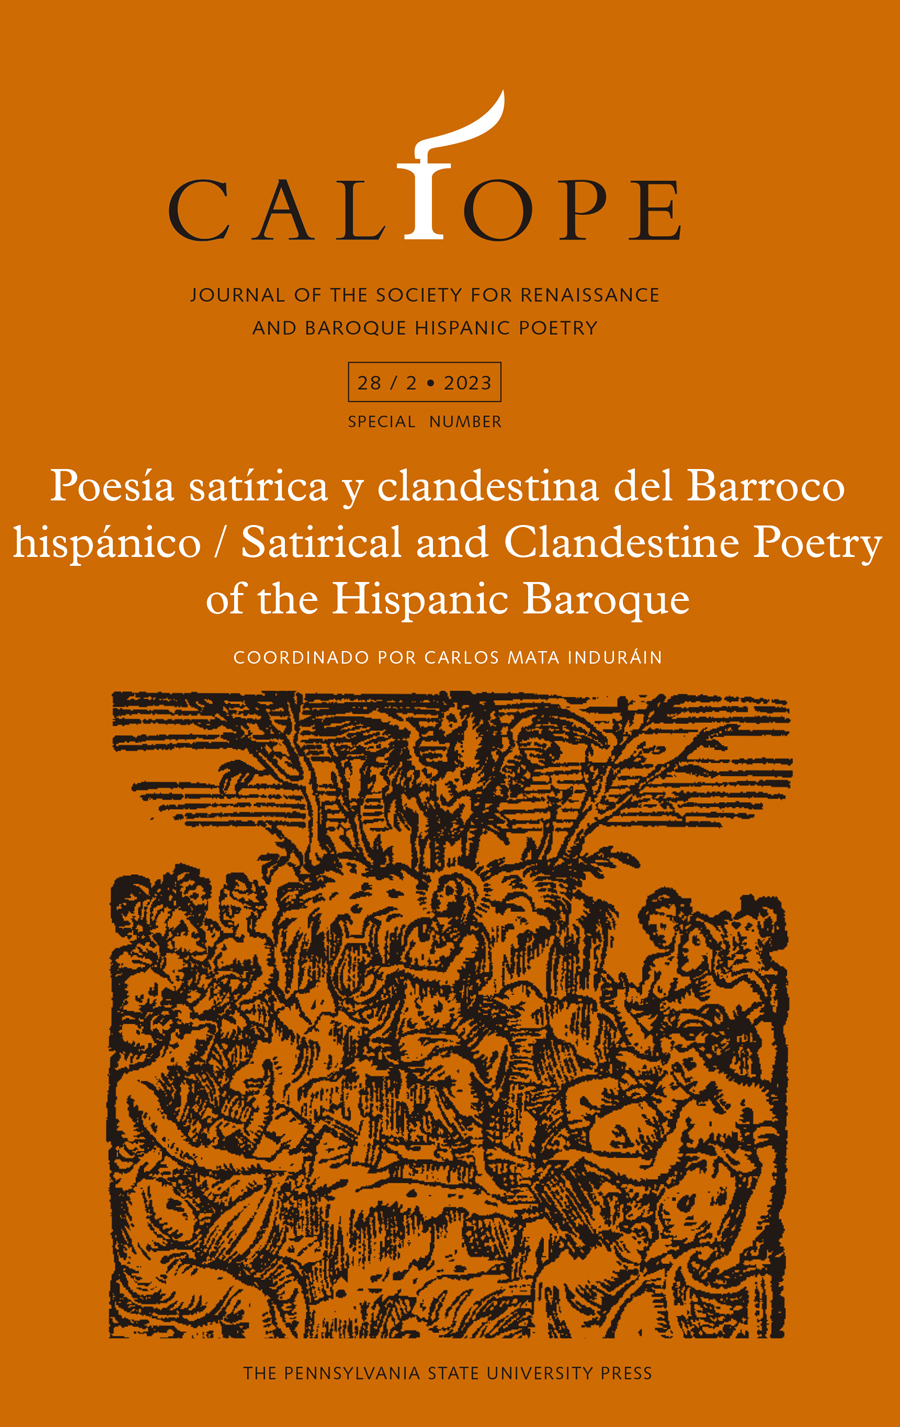 "Satirical and clandestine poetry of the Hispanic Baroque".